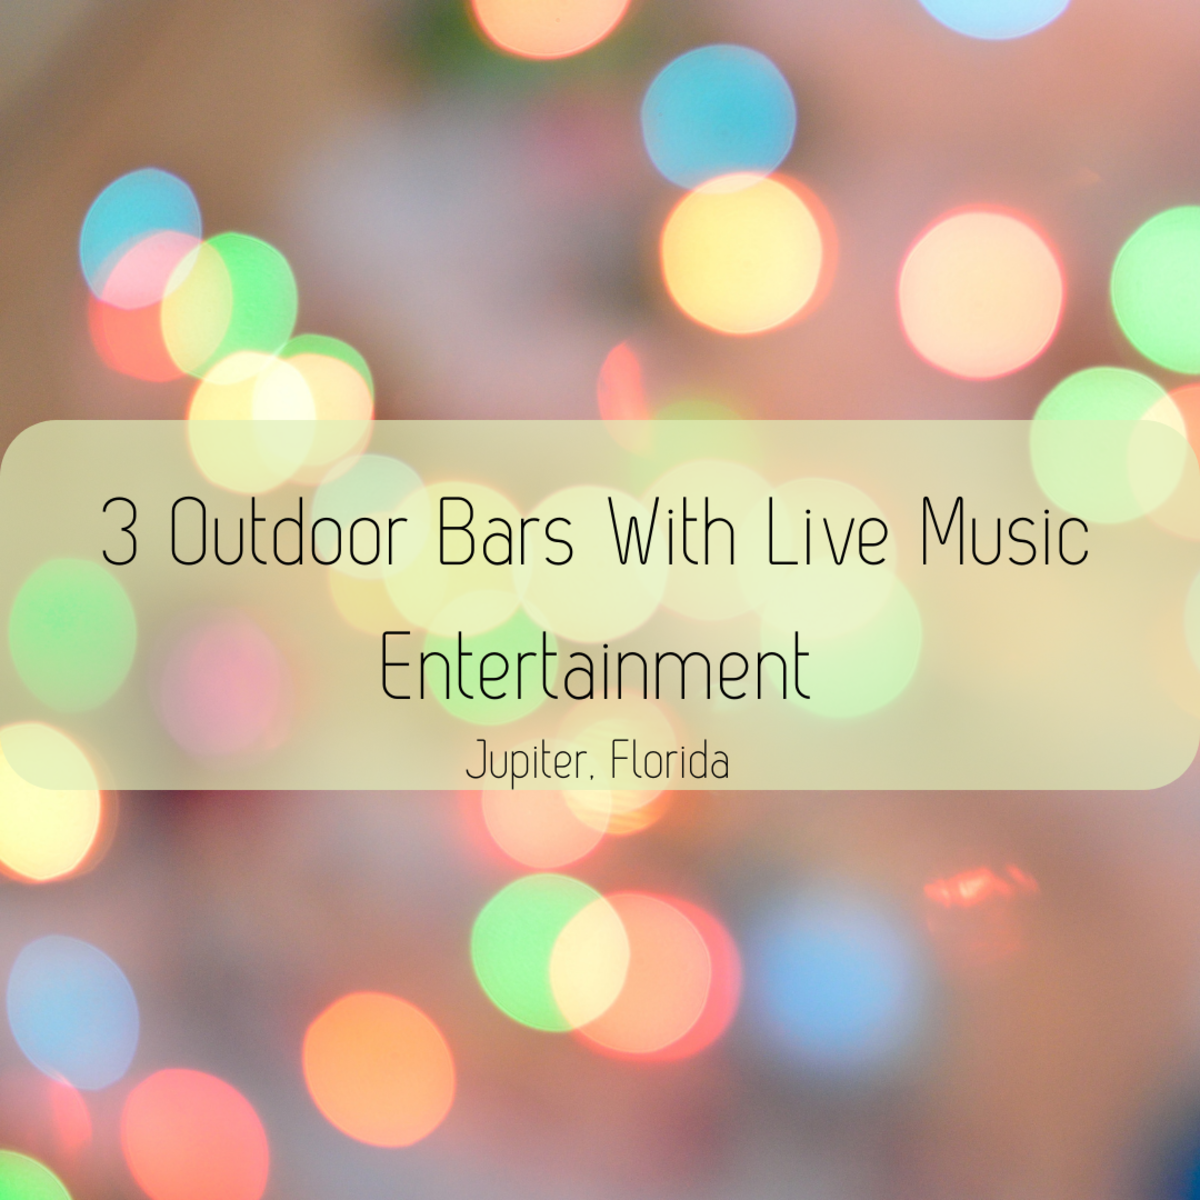 Looking for live entertainment to go along with your drinks in Jupiter, Florida? Check out these bars!